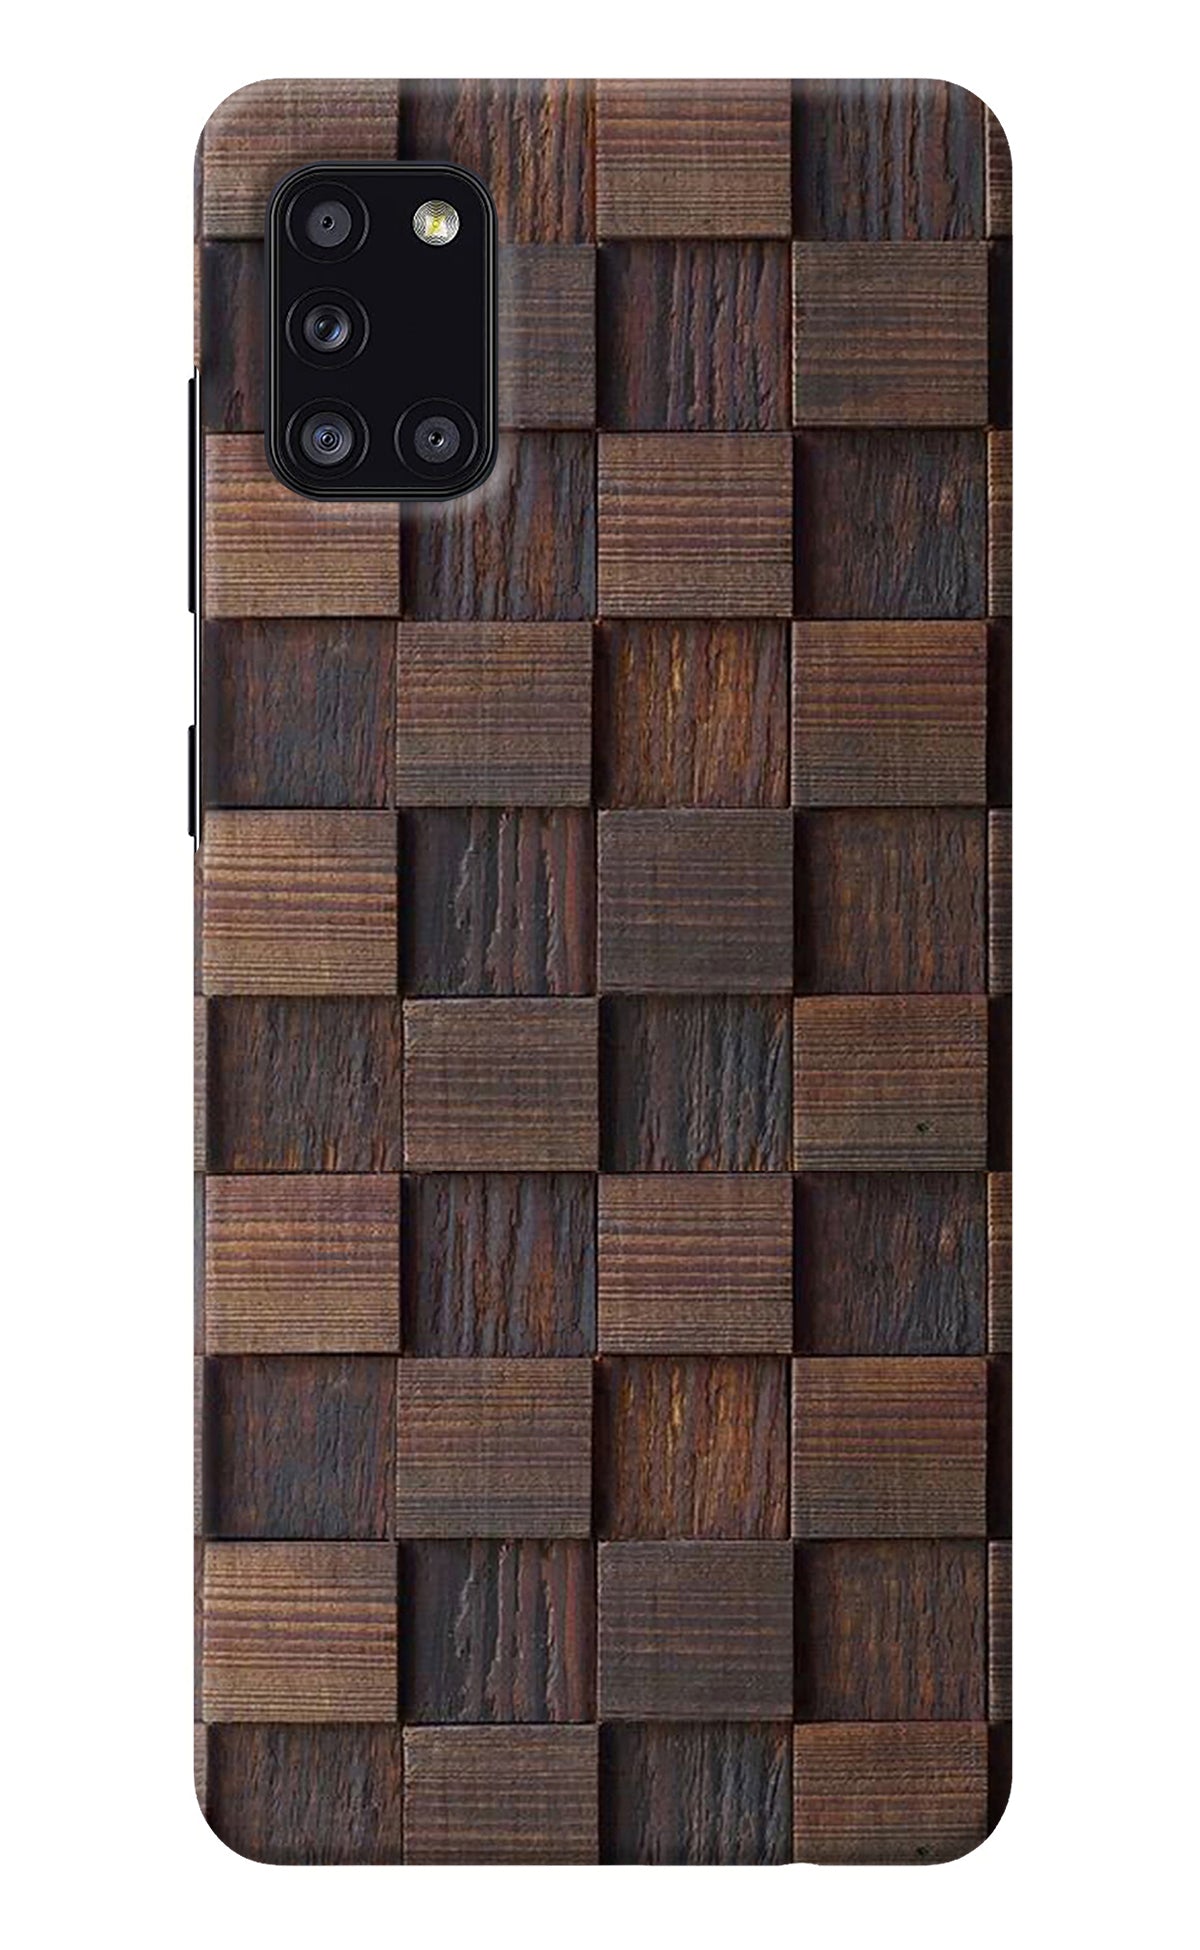 Wooden Cube Design Samsung A31 Back Cover